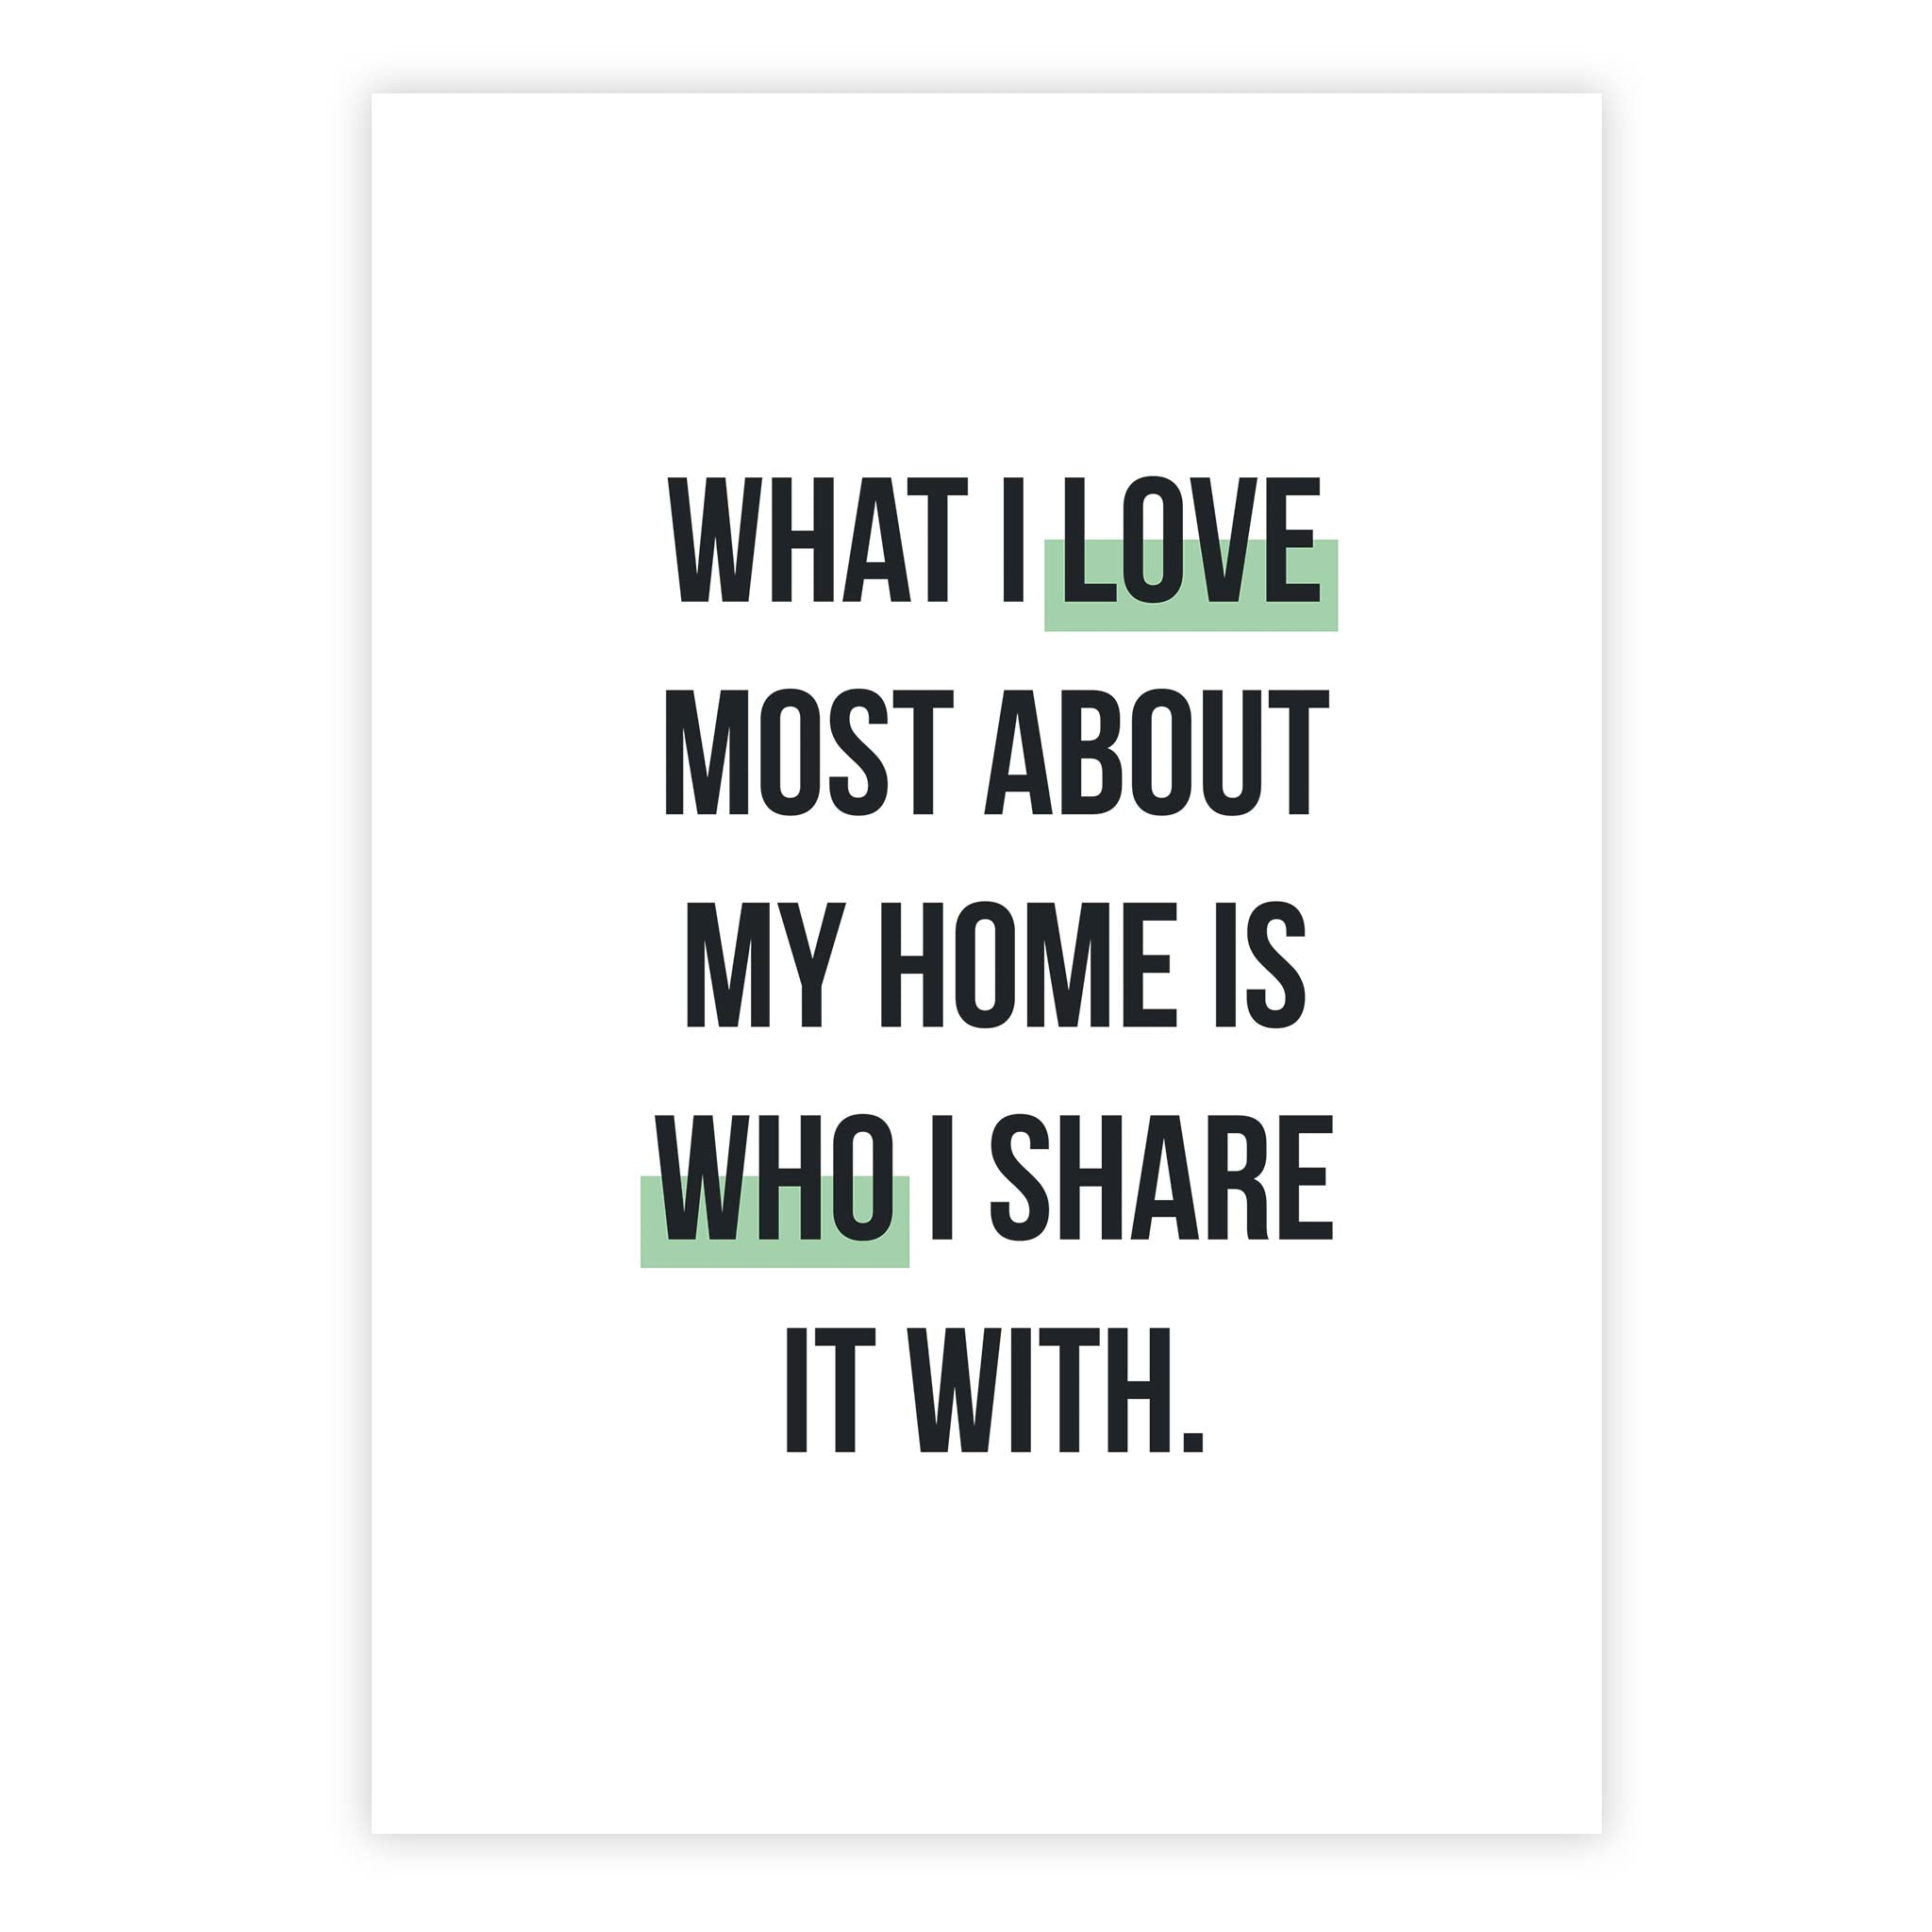 What I love most about my home is who I share it with